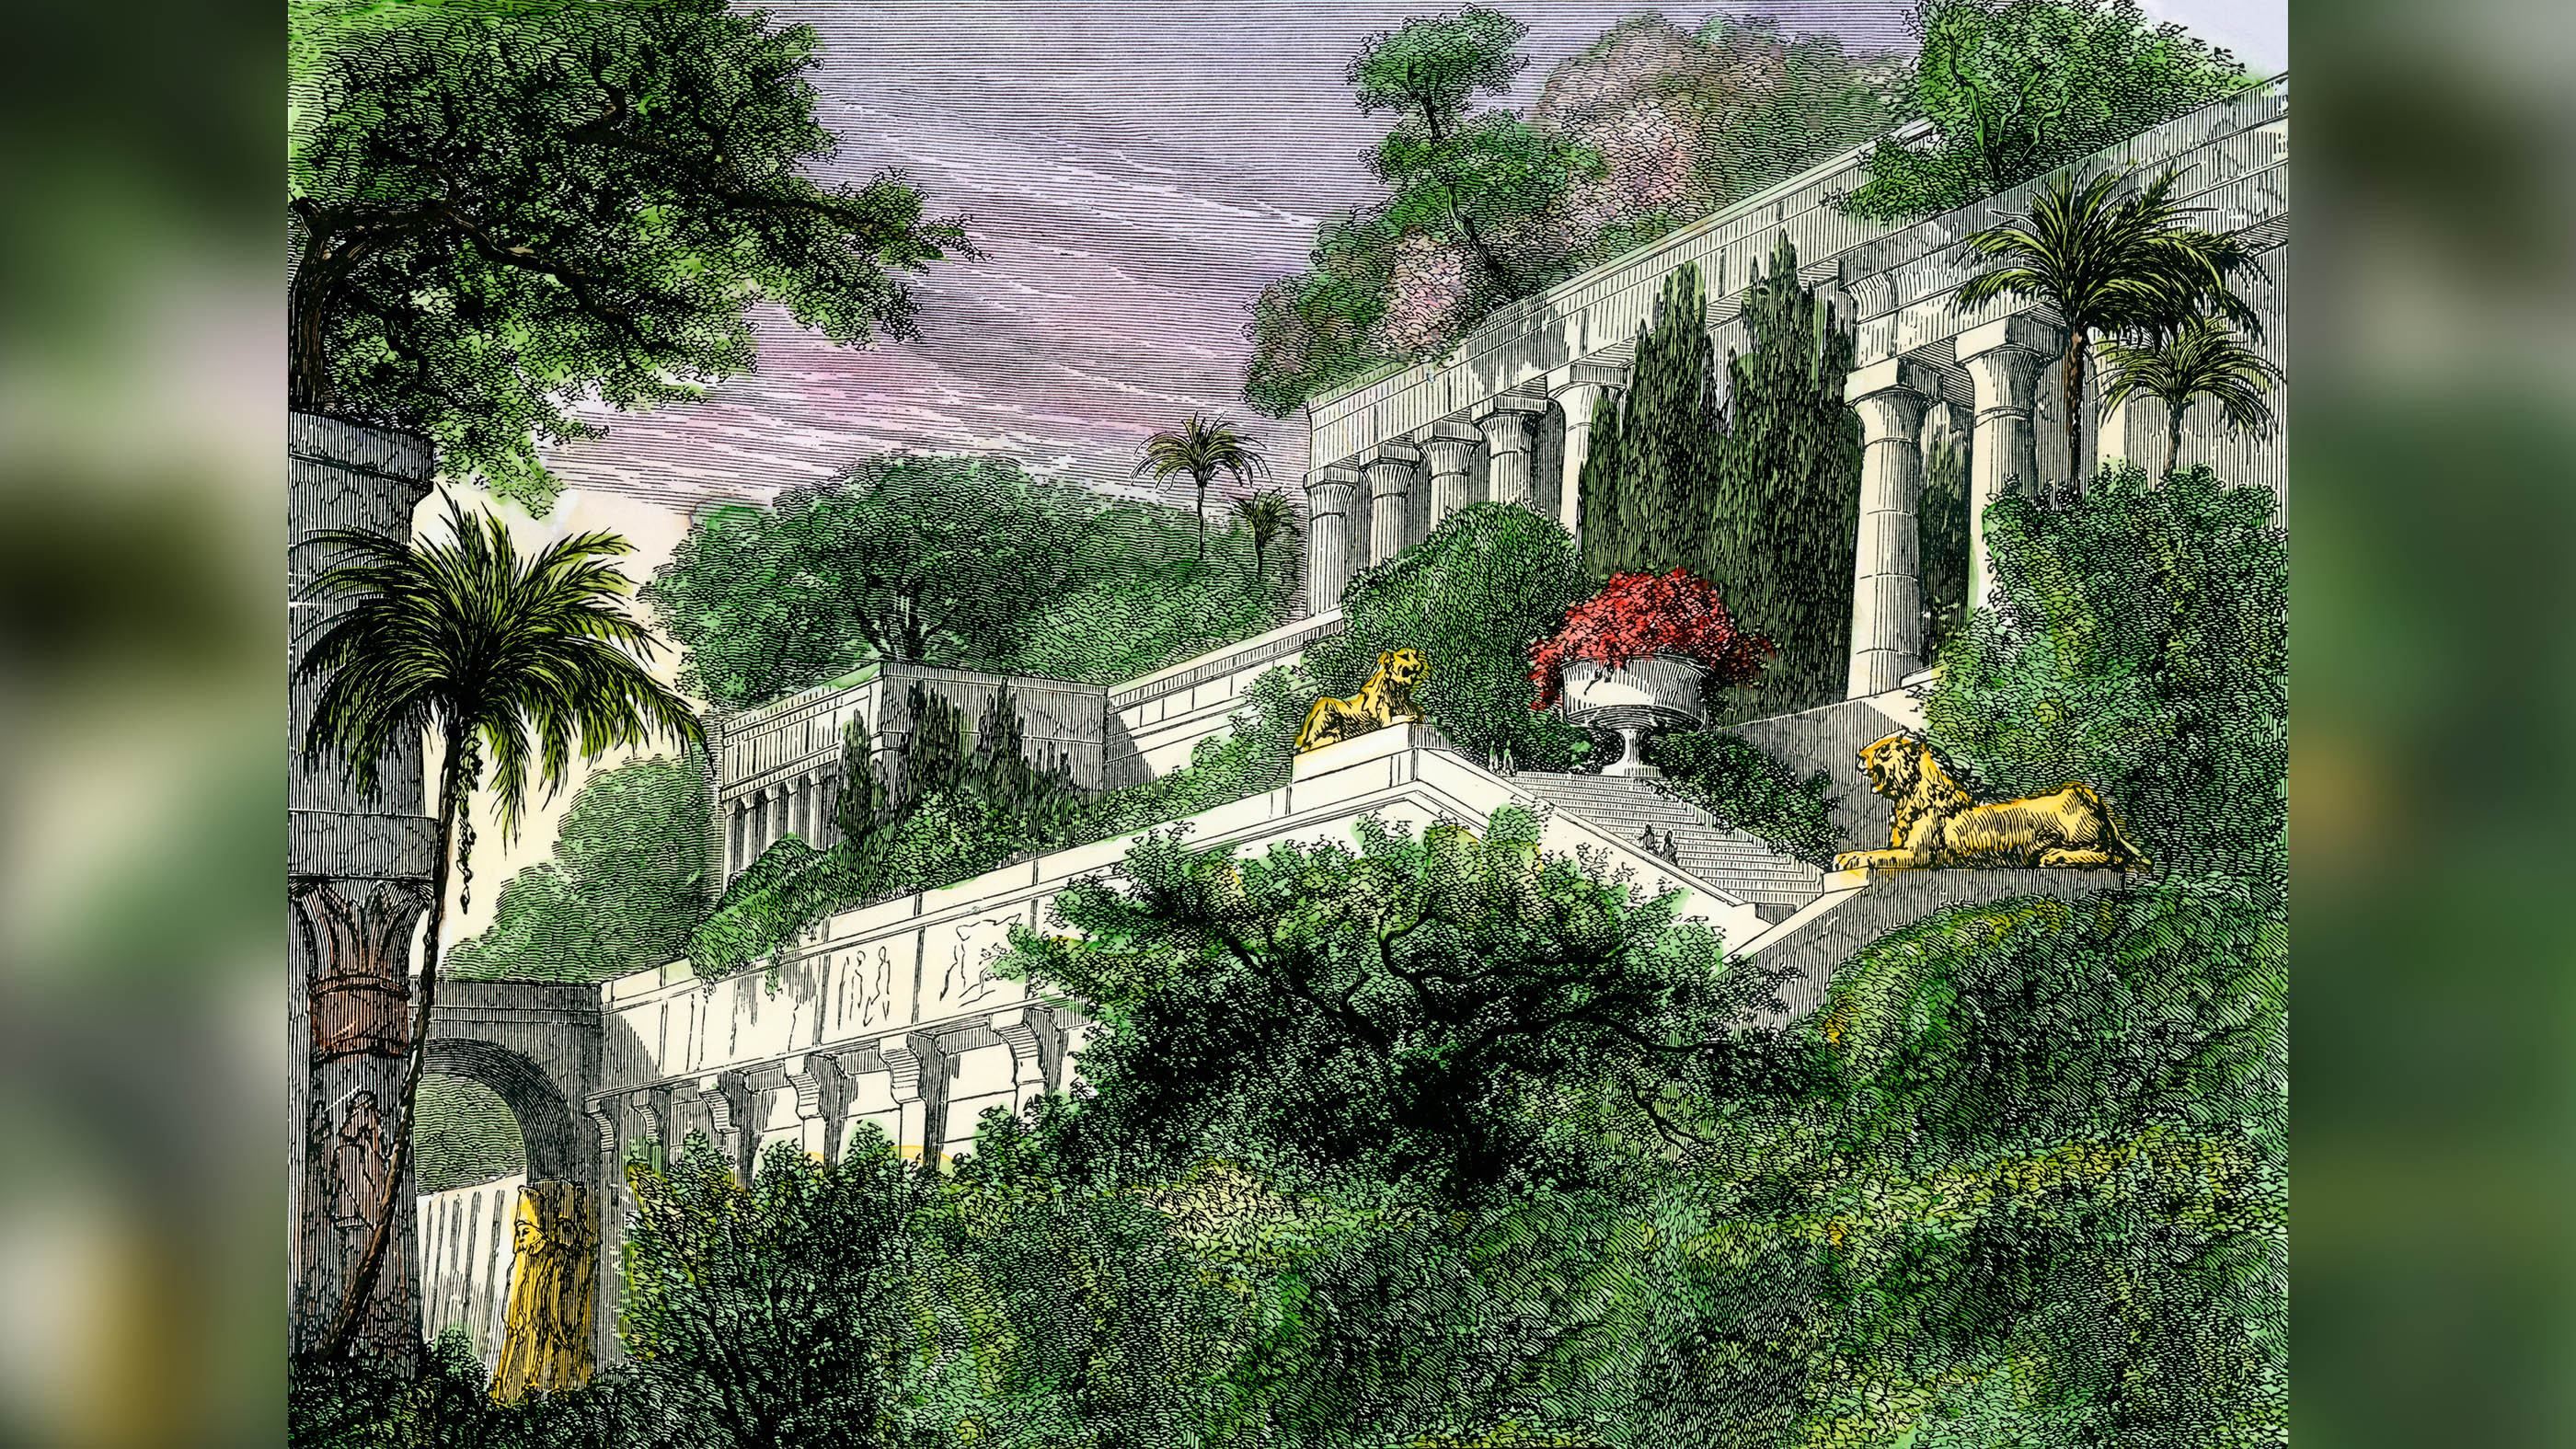 Here, a woodcut of the Hanging Gardens of Babylon in ancient times, which is one of the seven wonders of the ancient world.